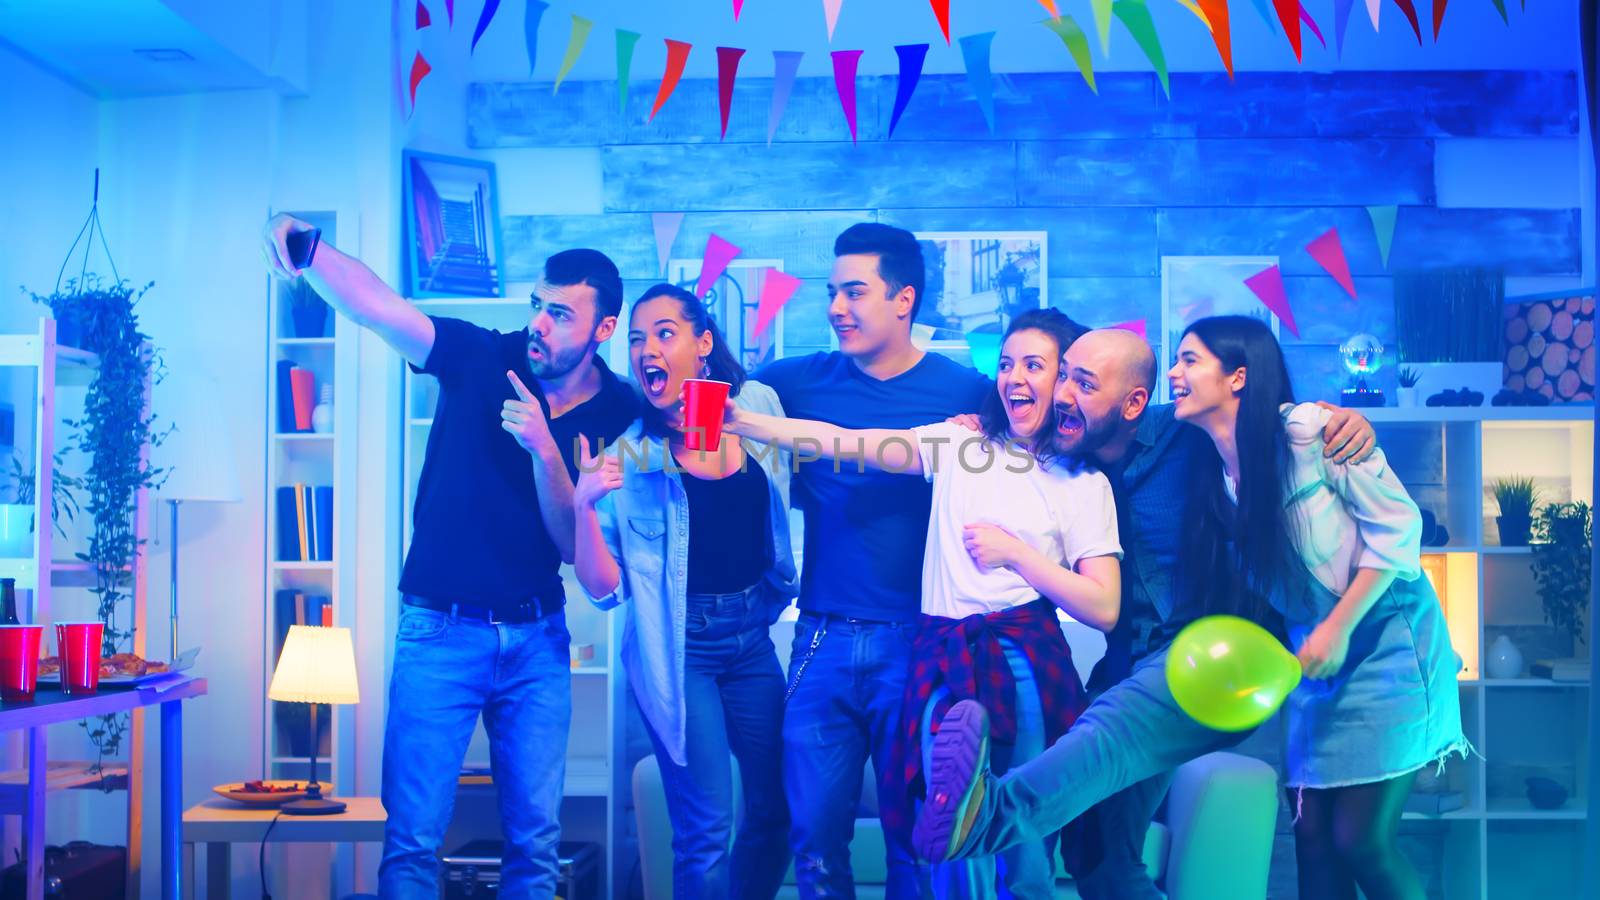 Group of cheerful young people at a party in an apartment with neon light taking a selfie.